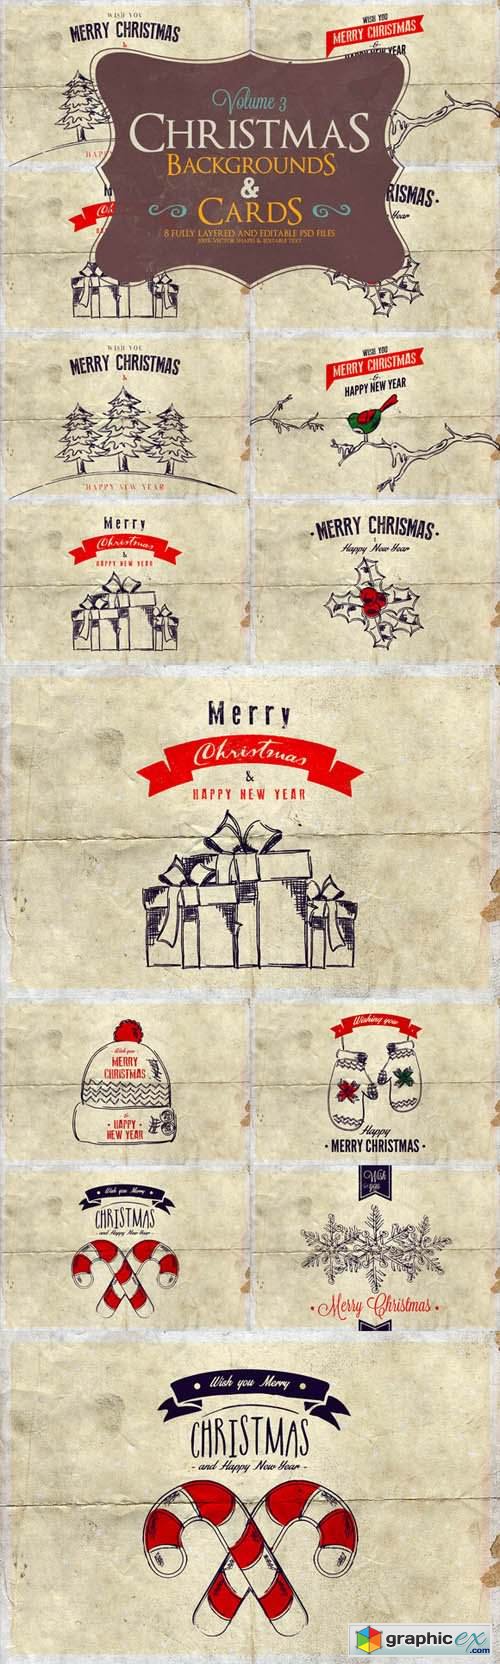 Christmas Background & Cards Vol.3